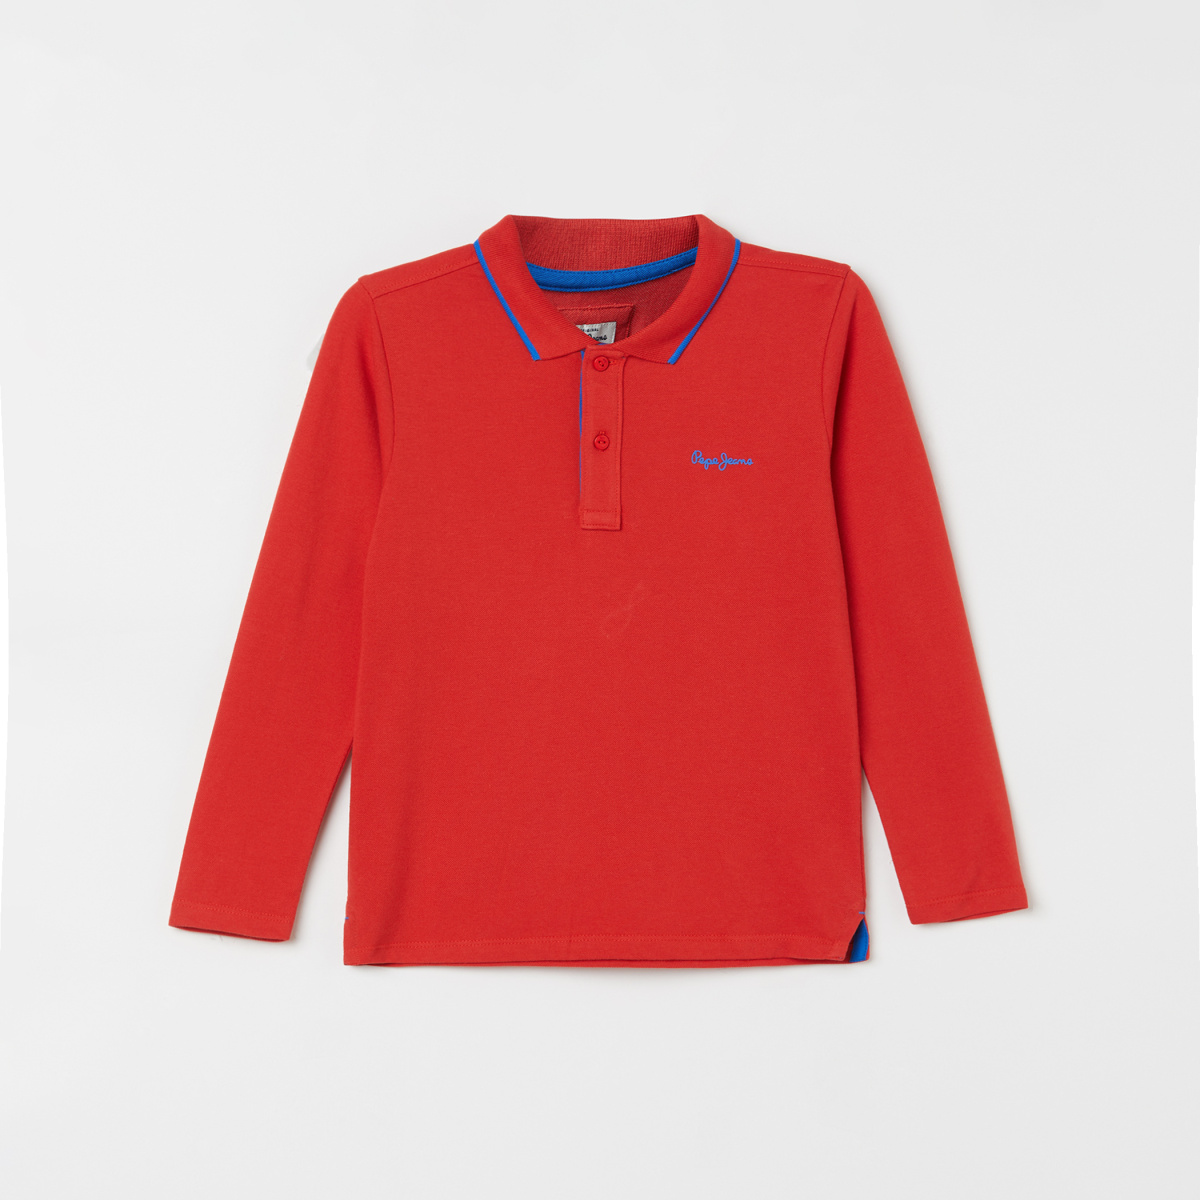 PEPE JEANS Boys Solid Full Sleeves Polo T-shirt